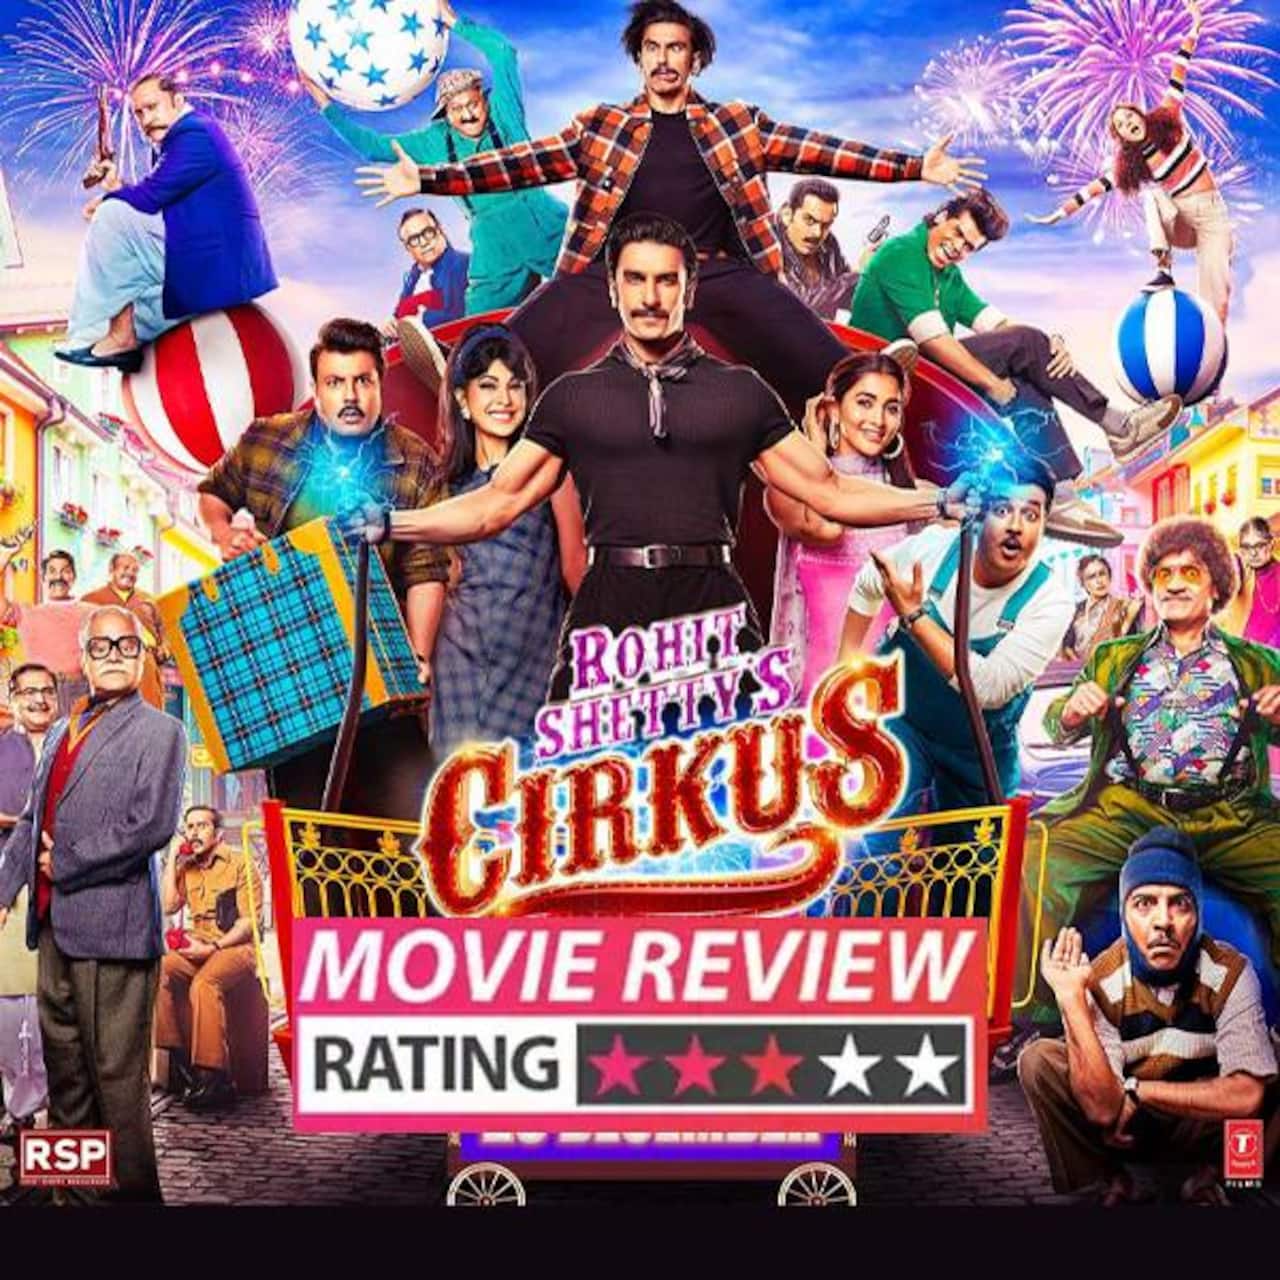 Cirkus Movie Review: Ranveer Singh, Rohit Shetty's comedy of errors is low on LOL moments but successfully delivers the Christmas cheer